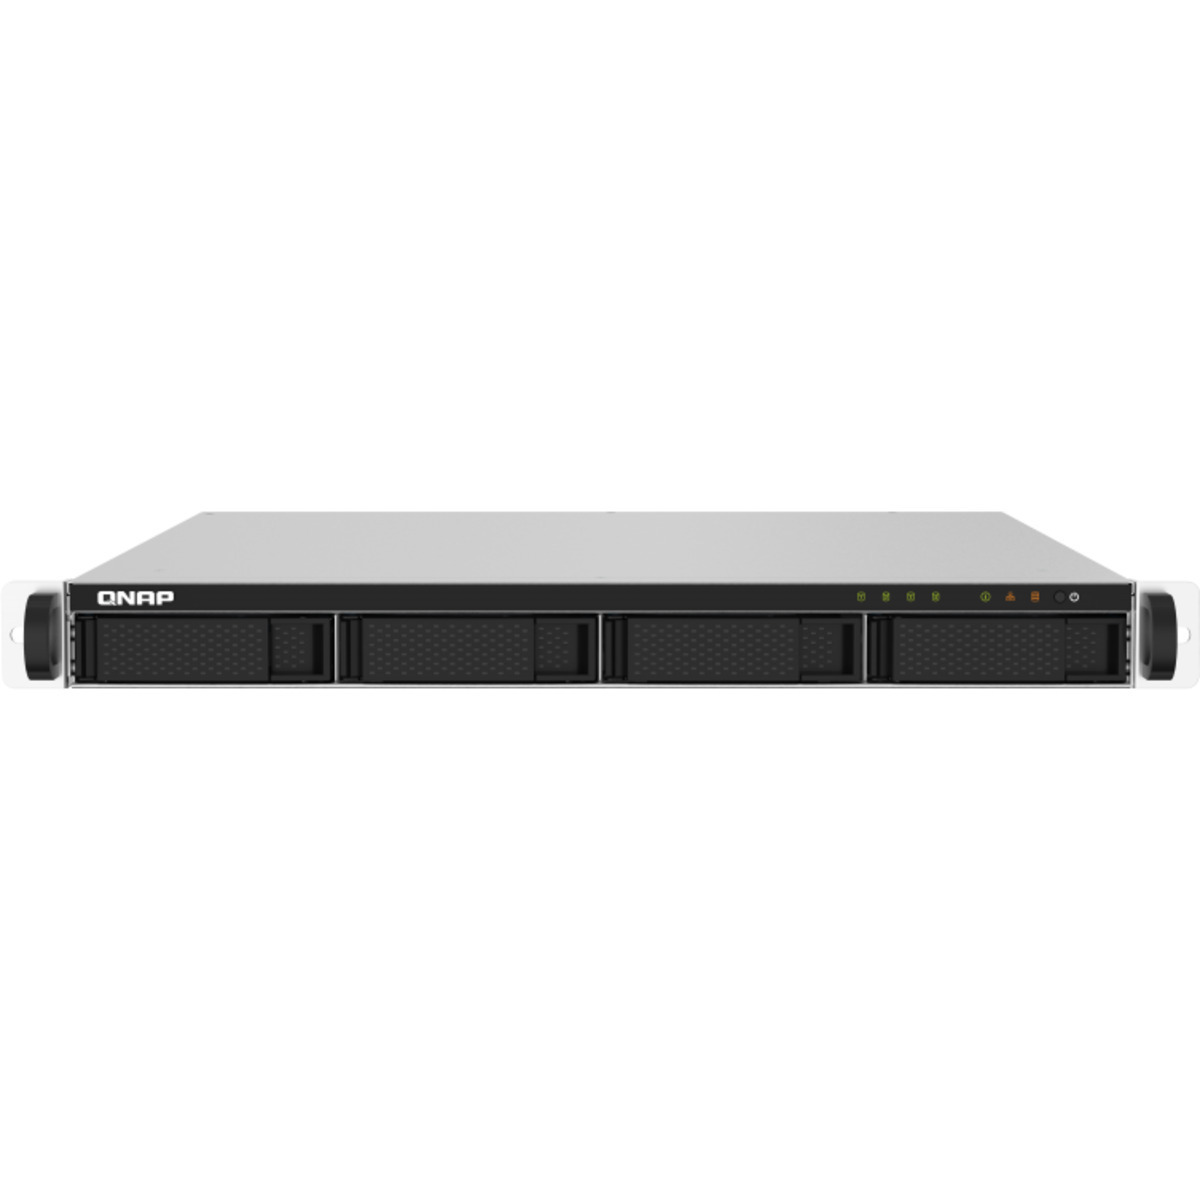 buy $1233 QNAP TS-432PXU 8tb RackMount NAS - Network Attached Storage Device 4x2000gb Seagate BarraCuda ST2000DM008 3.5 7200rpm SATA 6Gb/s HDD CONSUMER Class Drives Installed - Burn-In Tested - ON SALE - FREE RAM UPGRADE - nas headquarters buy network attached storage server device das new raid-5 free shipping usa christmas new year holiday sale TS-432PXU